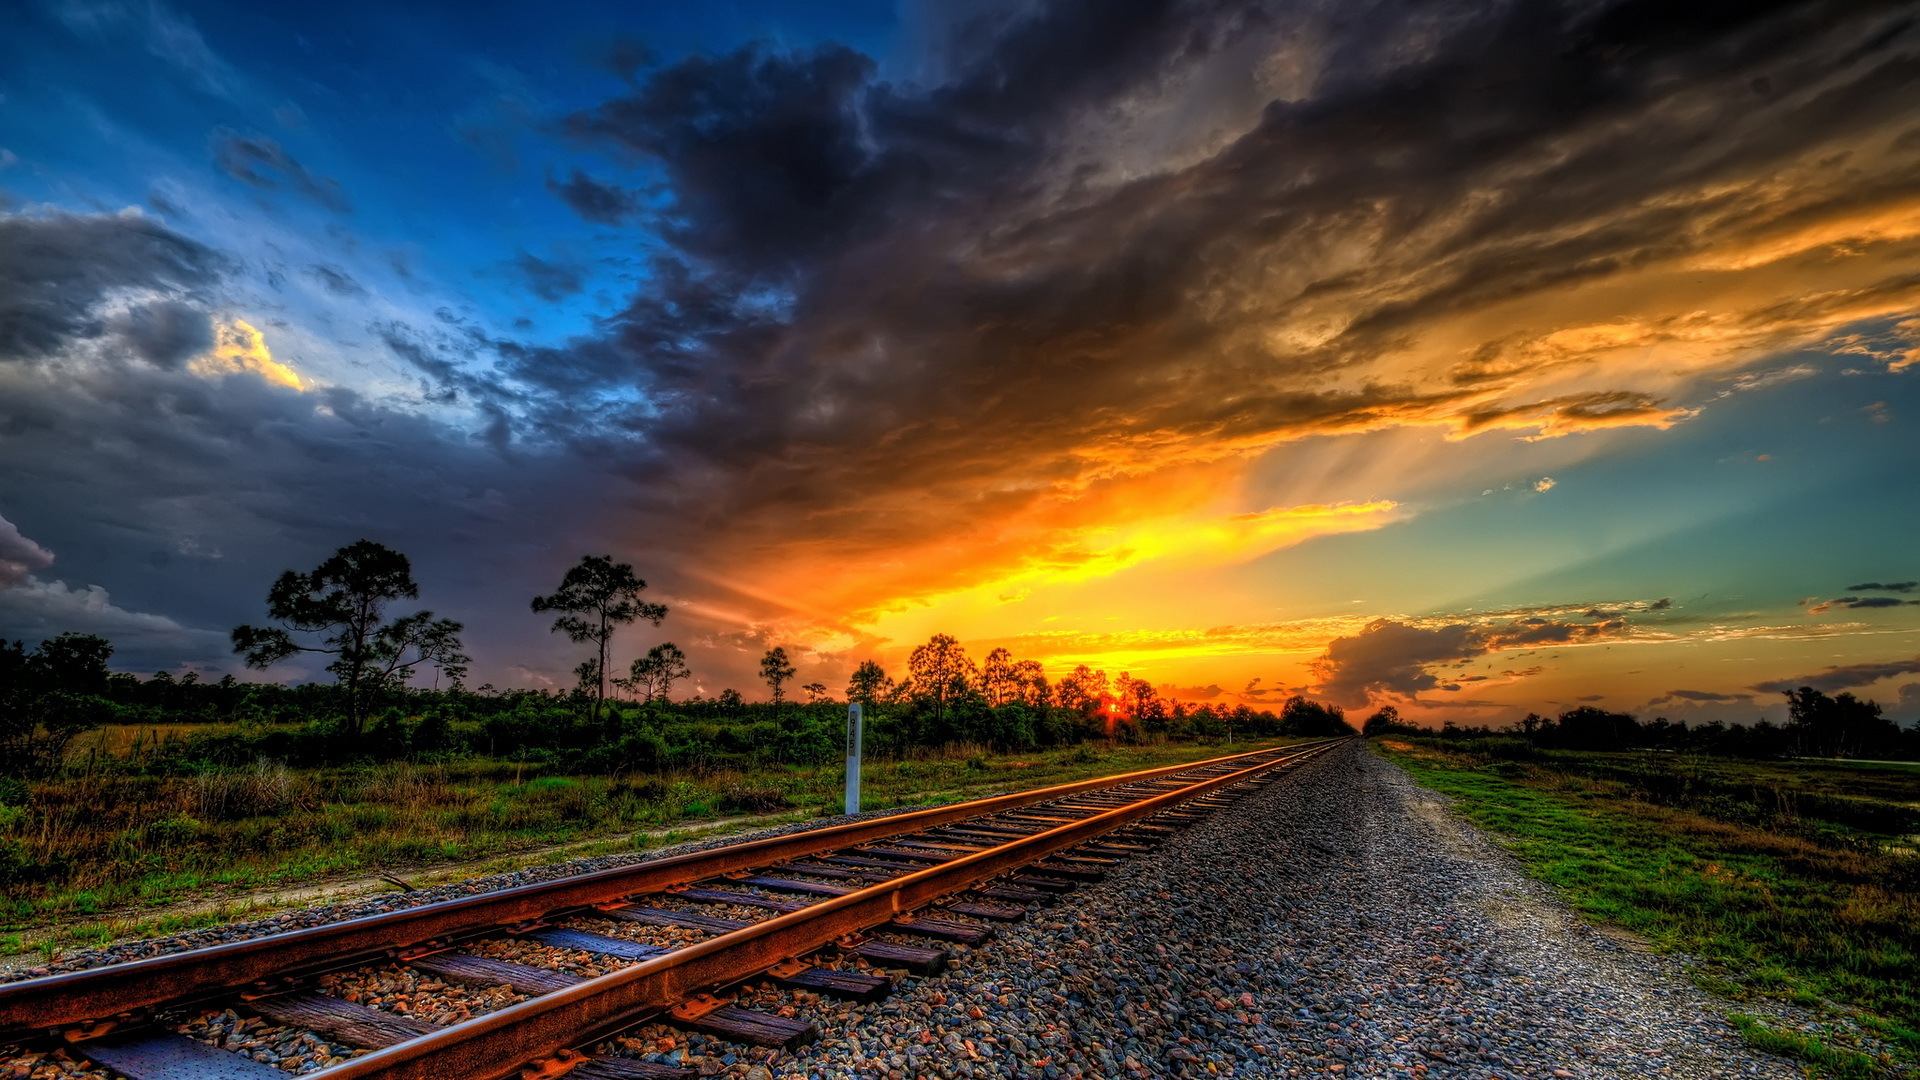 railroad 1080P 2k 4k HD wallpapers backgrounds free download  Rare  Gallery